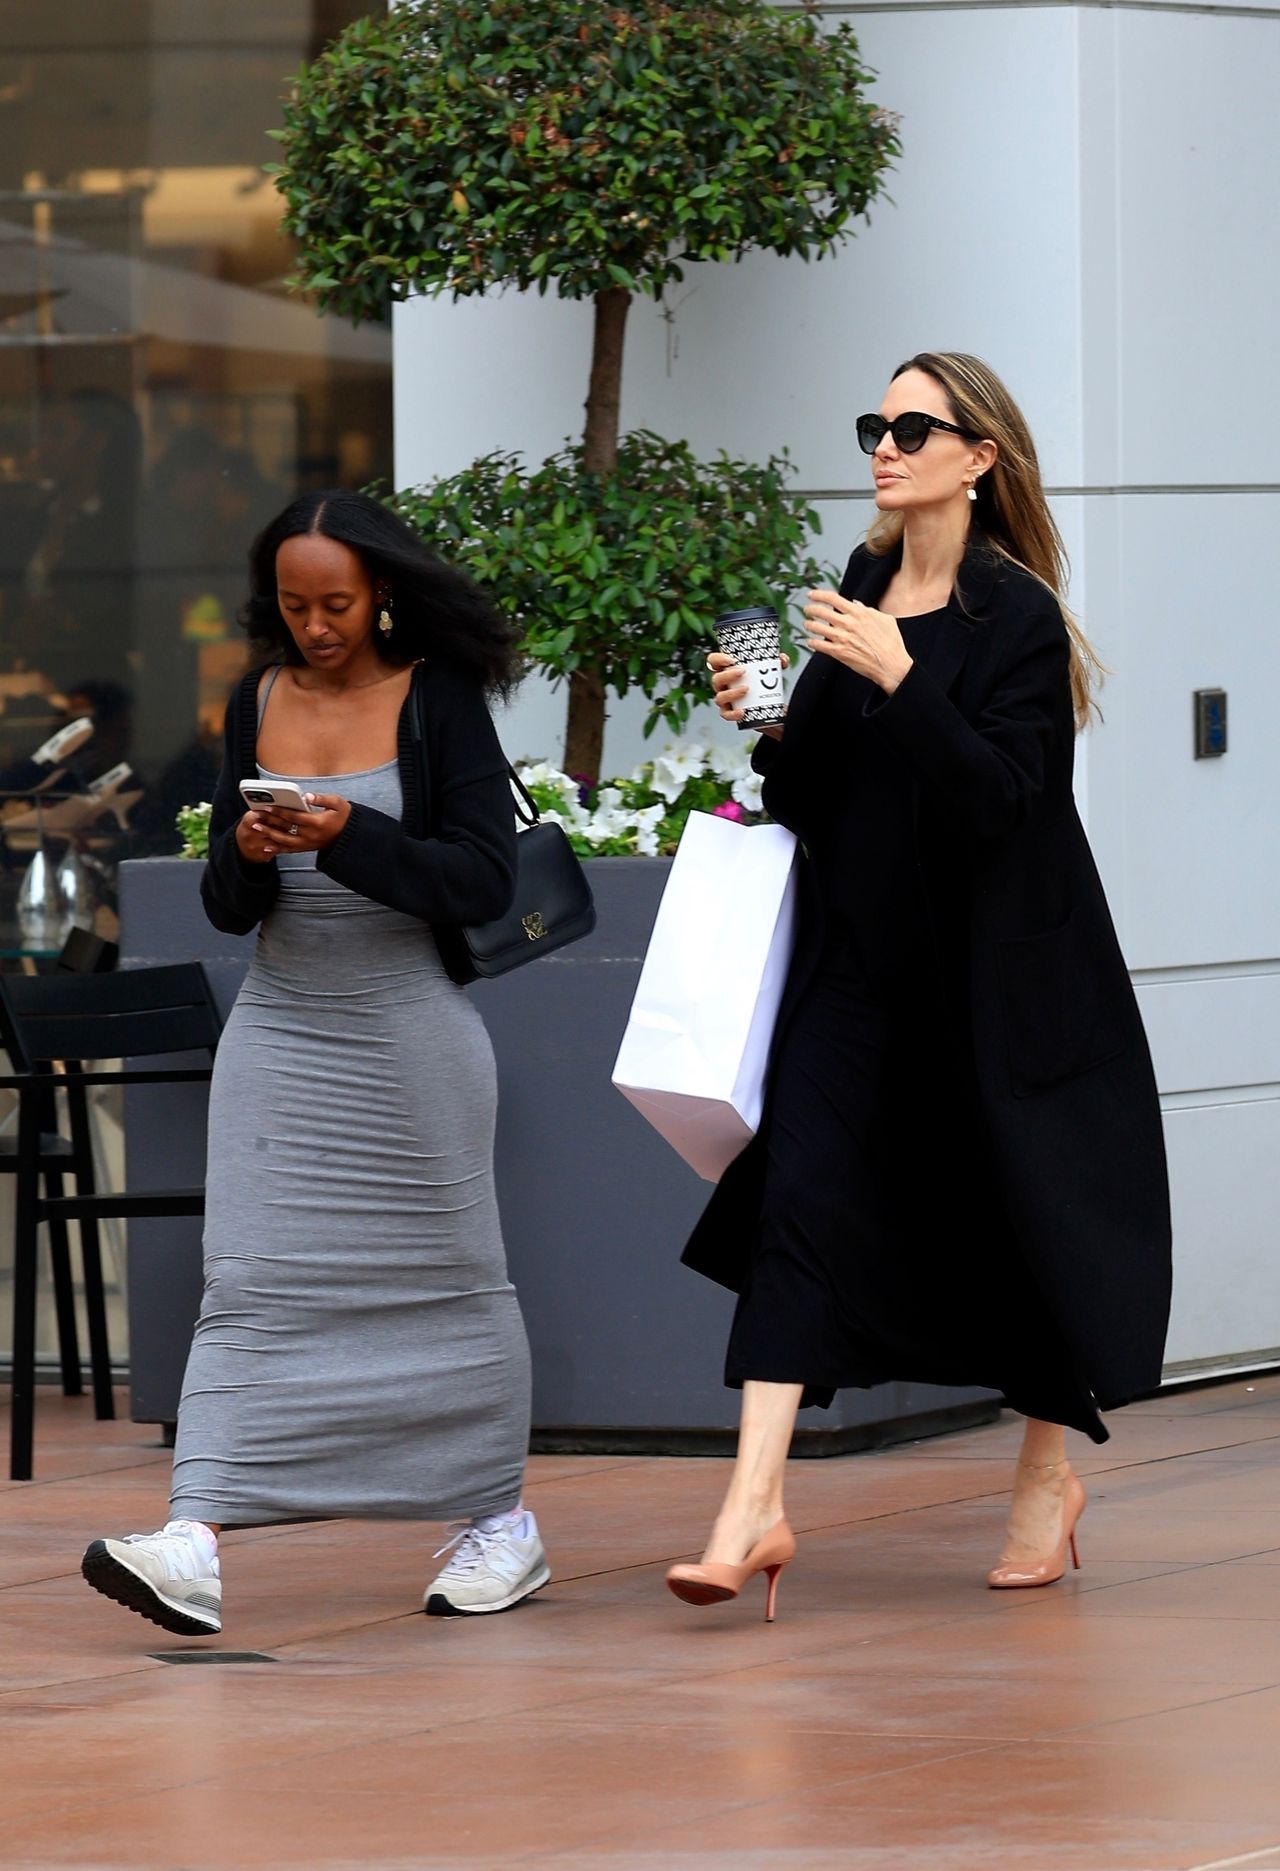 Angelina Jolie "caught" in the city with daughter